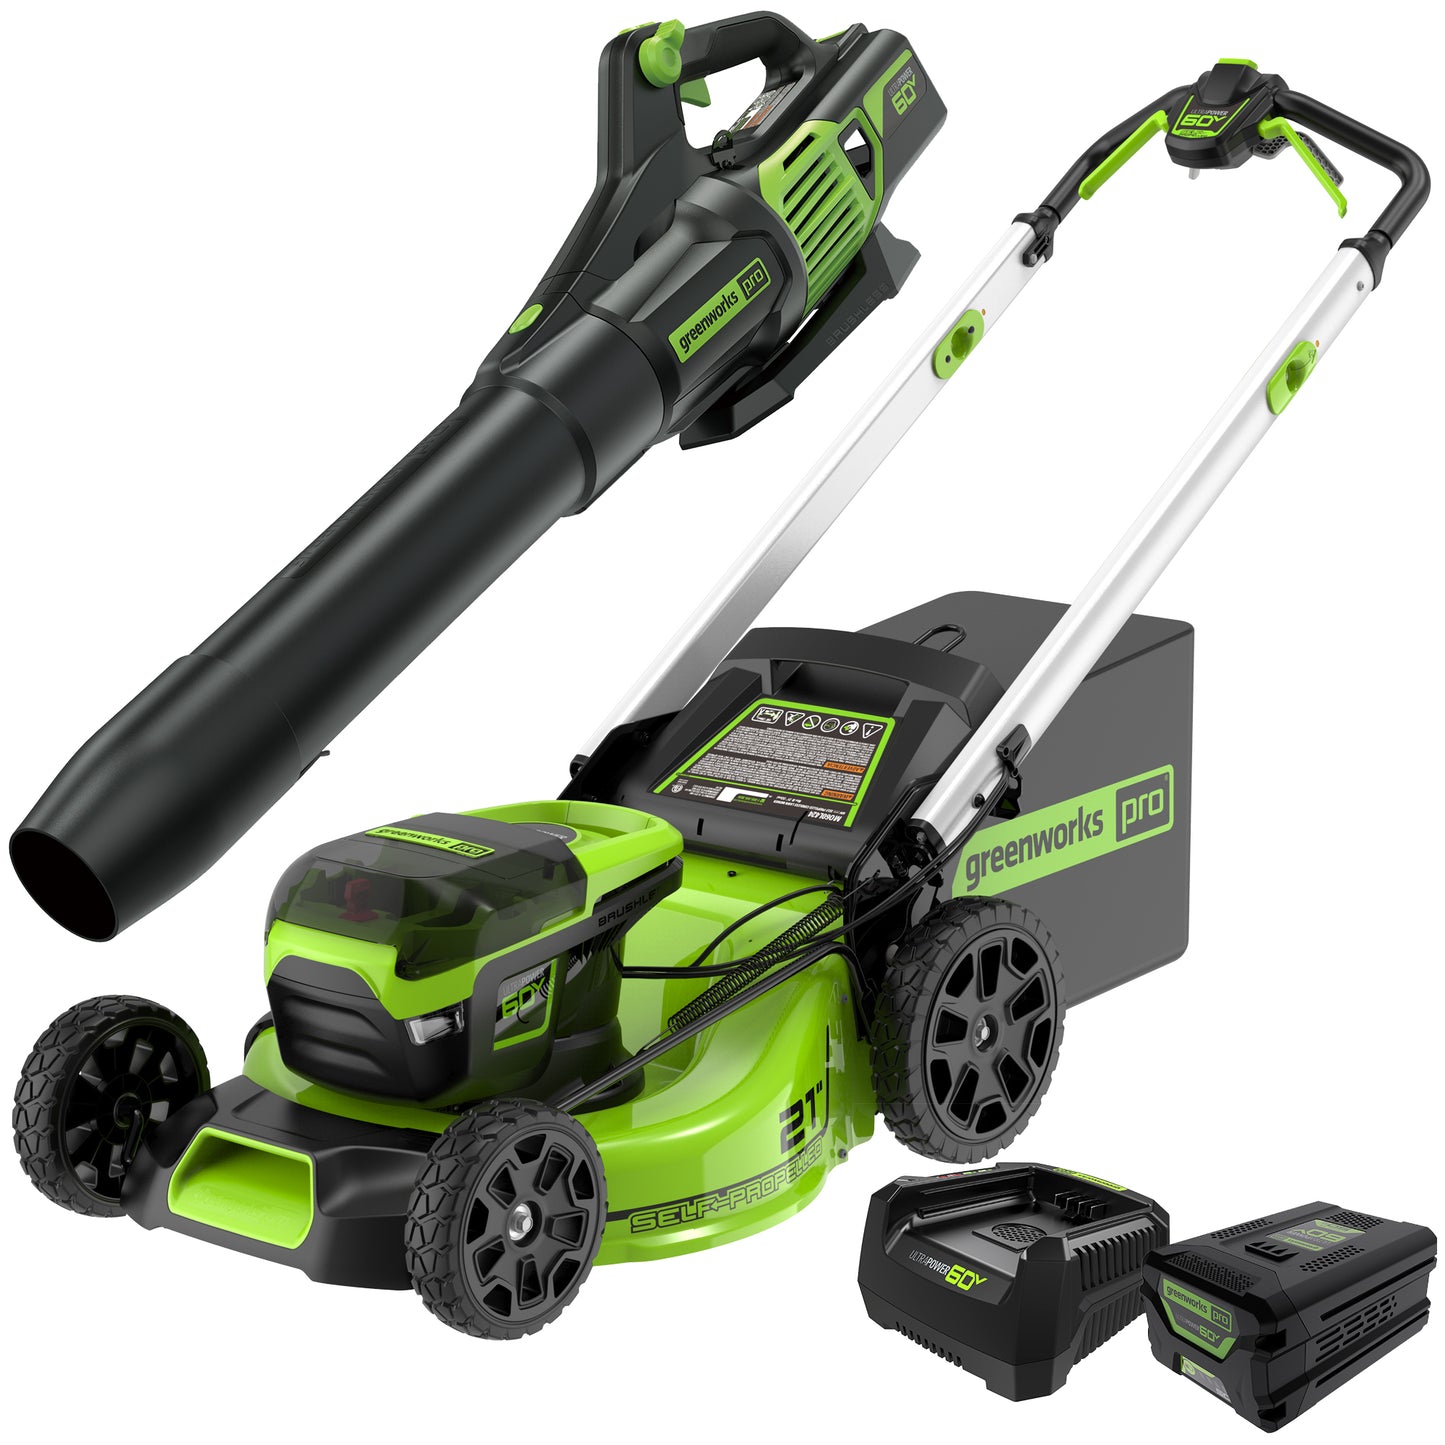 60V 21" Cordless Battery Self-Propelled Mower w/ Blower, (1) 5.0Ah and Rapid Charger